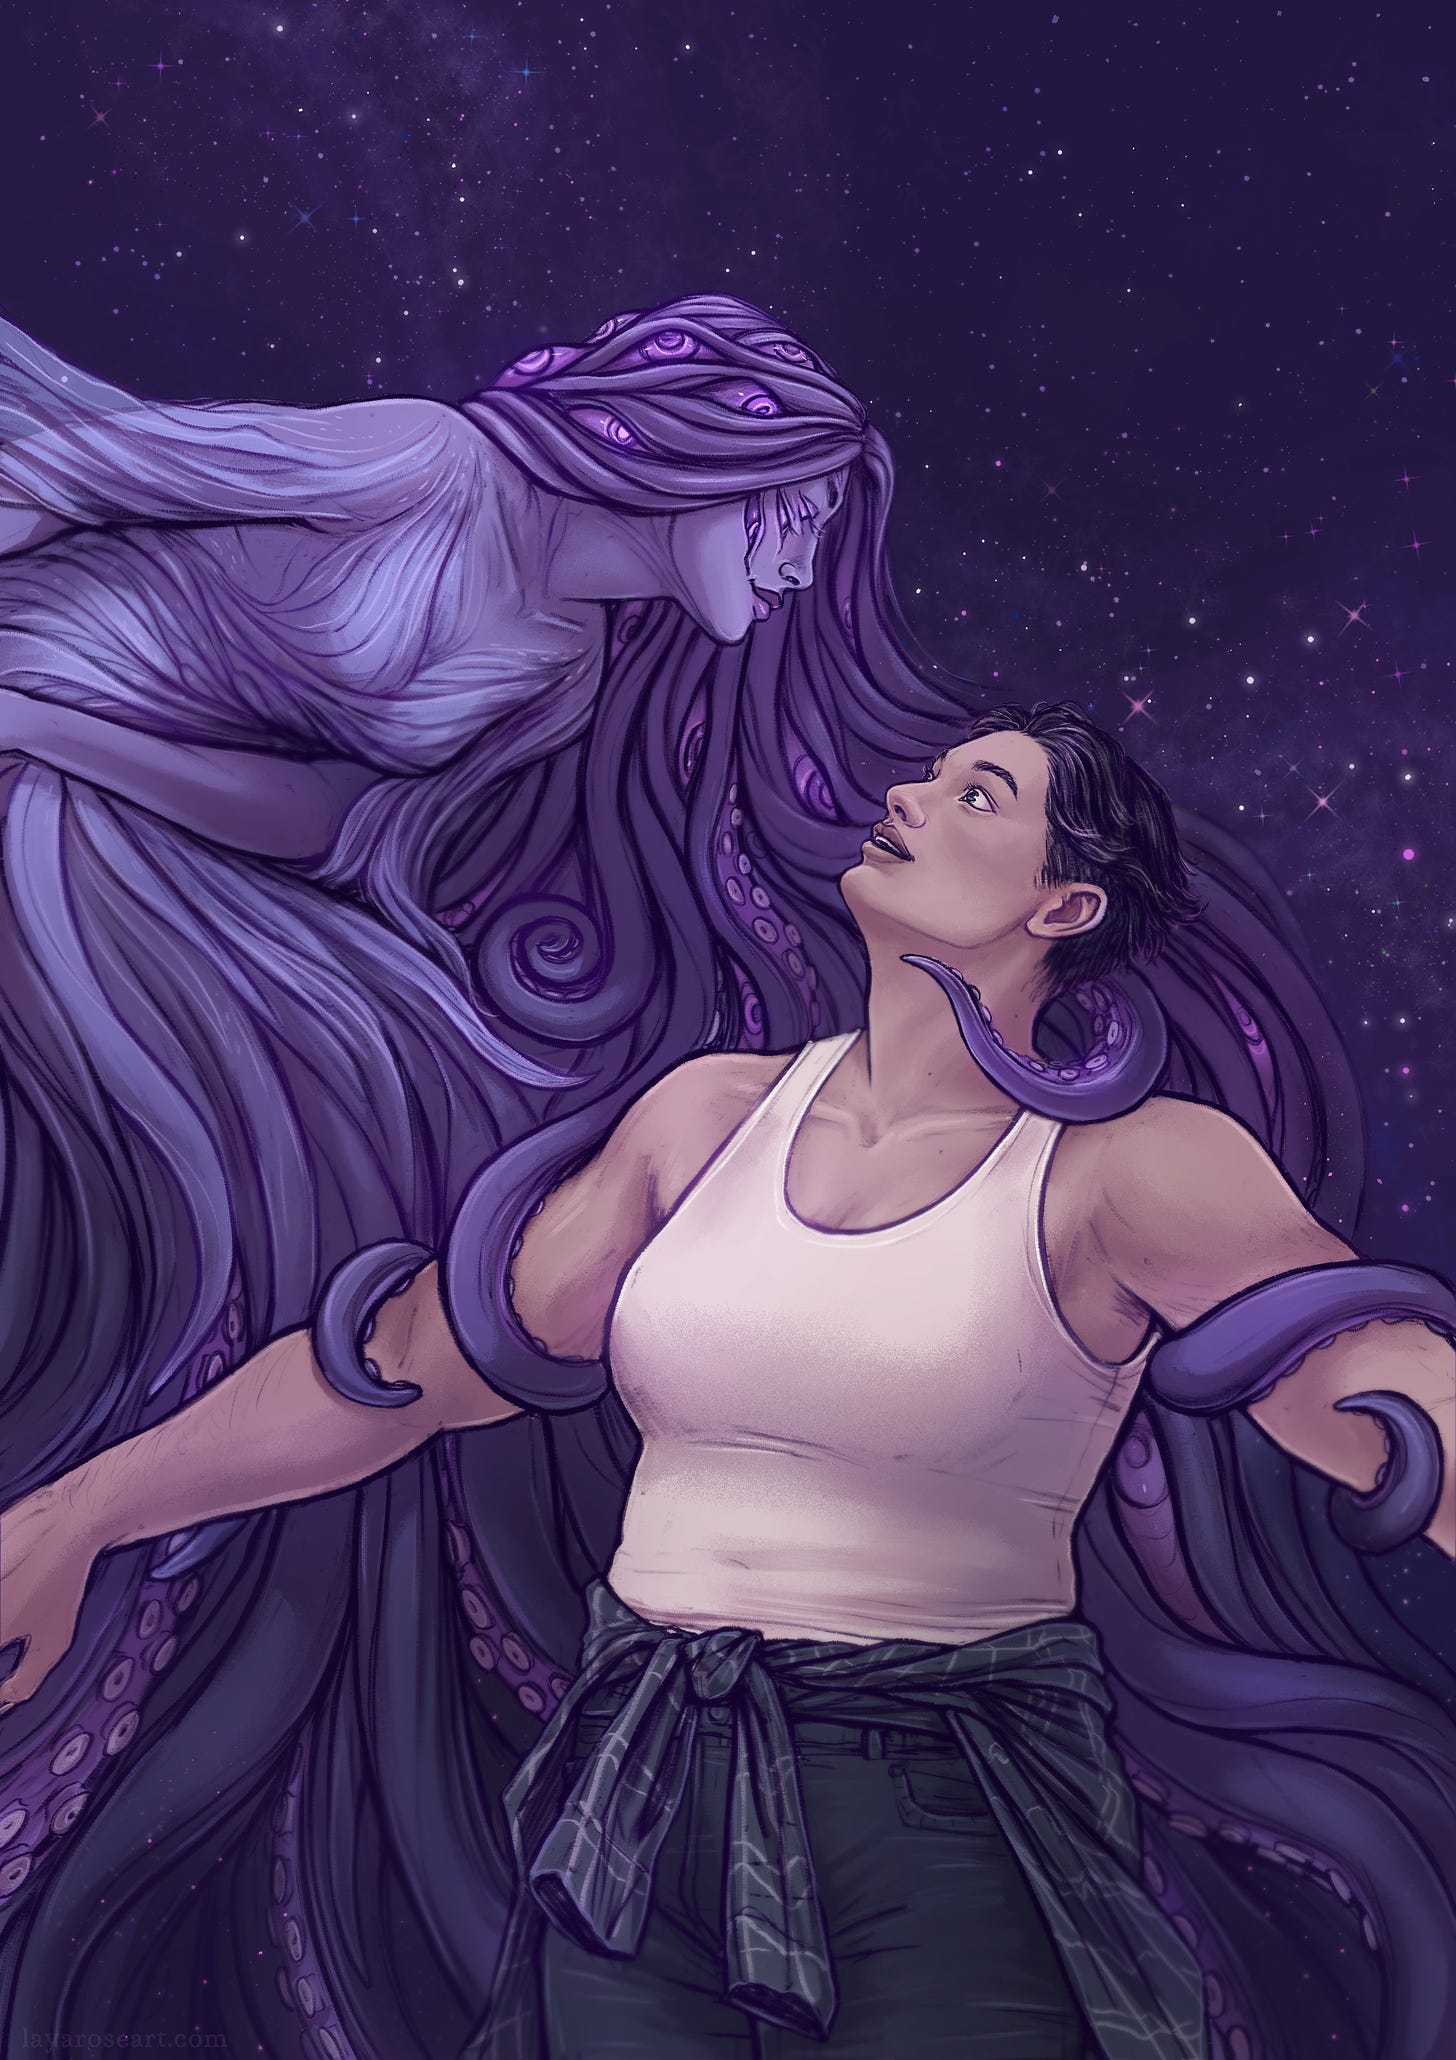 Illustration based on la belle dame sans merci, but with space lesbians. trillin is a purple space monster with thick tendrils of hair that turn into tentacles, and have eyes poking out of them. She has extra eyes, and is in a flowy dress that's growing off her skin, and leaning down towards Sian. Sian is butch, with short dark hair and wearing a white tank top and dark pants with plaid around her waist. She is looking up with a shocked but happy expression about the tentacles wrapping around her biceps and neck. The background is starry space.